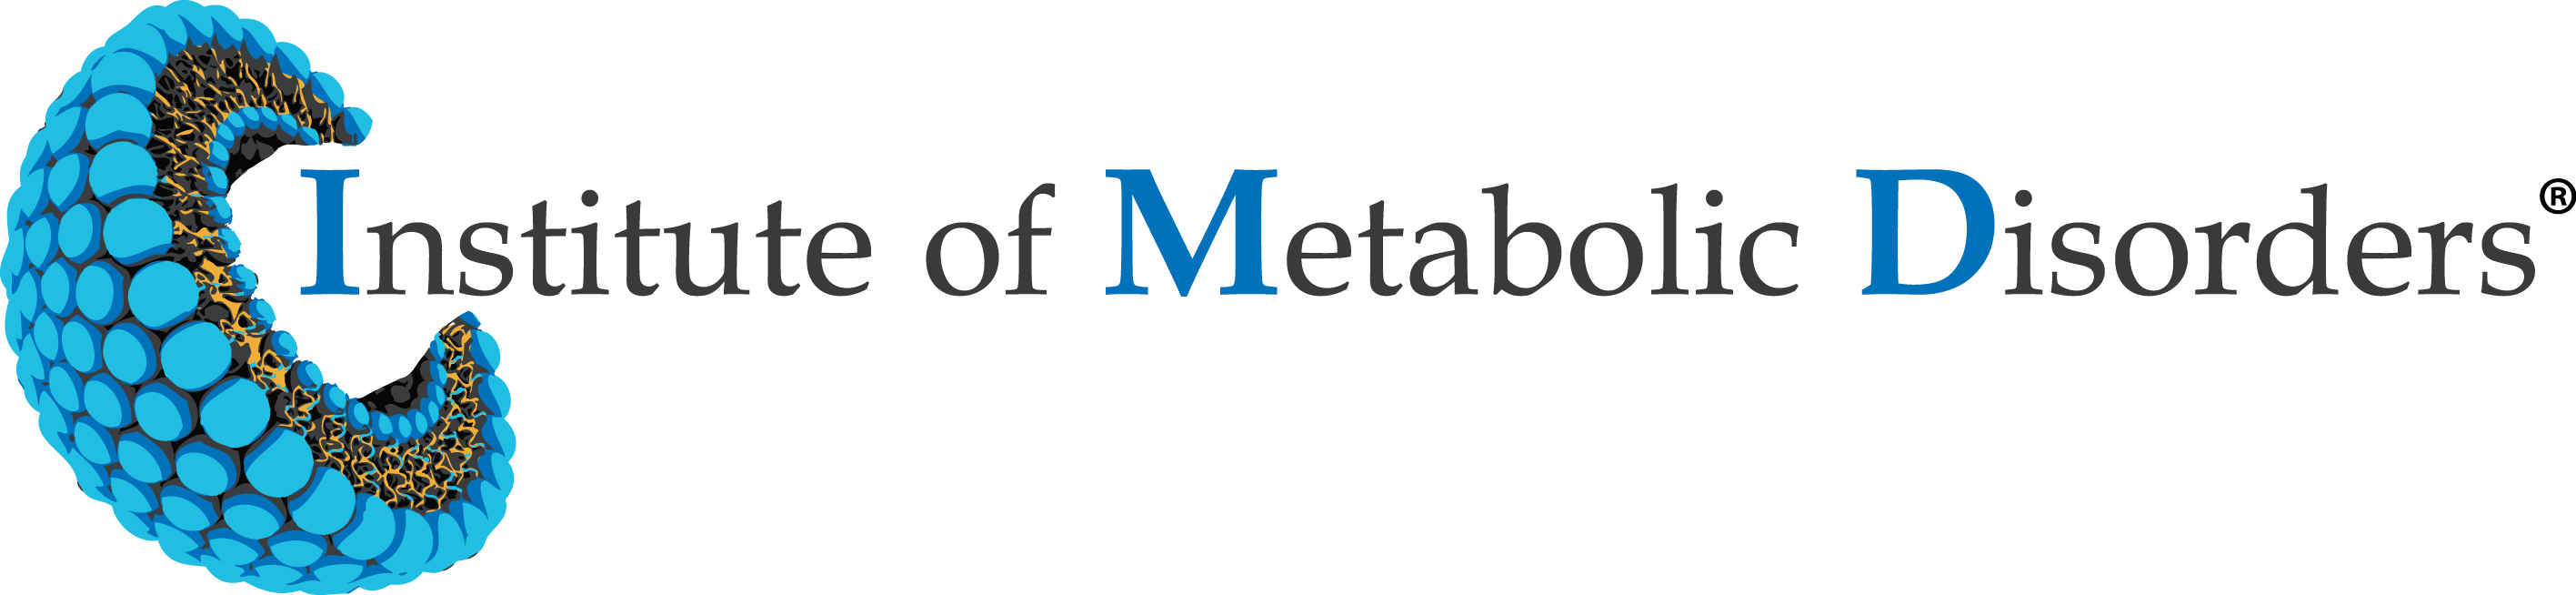 Institute of Metabolic Disorders|| gbg.png